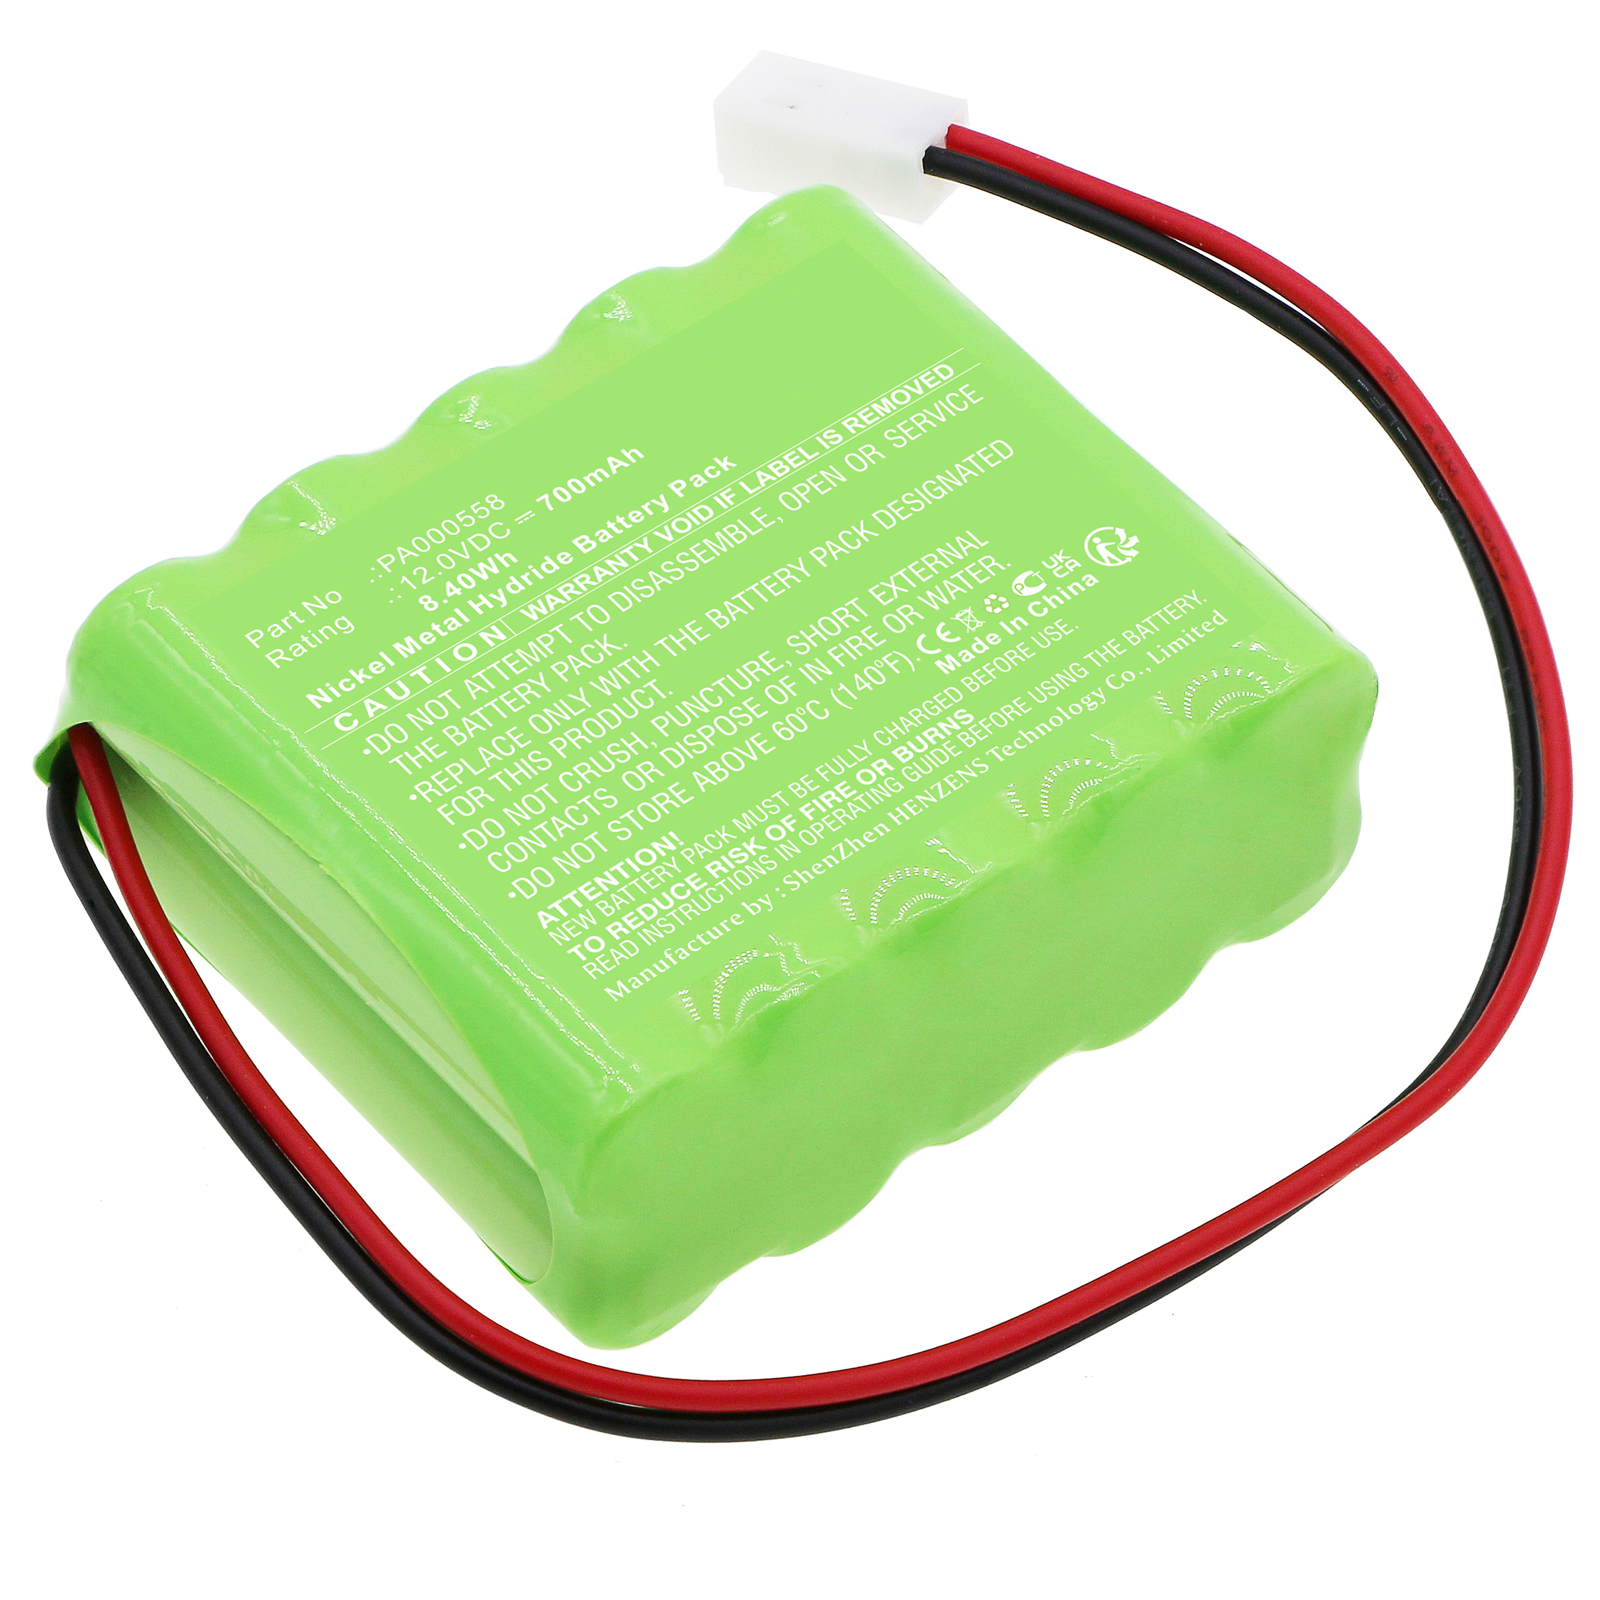 Synergy Digital Smart Home Battery, Compatible with Roma PA000558 Smart Home Battery (Ni-MH, 12V, 700mAh)